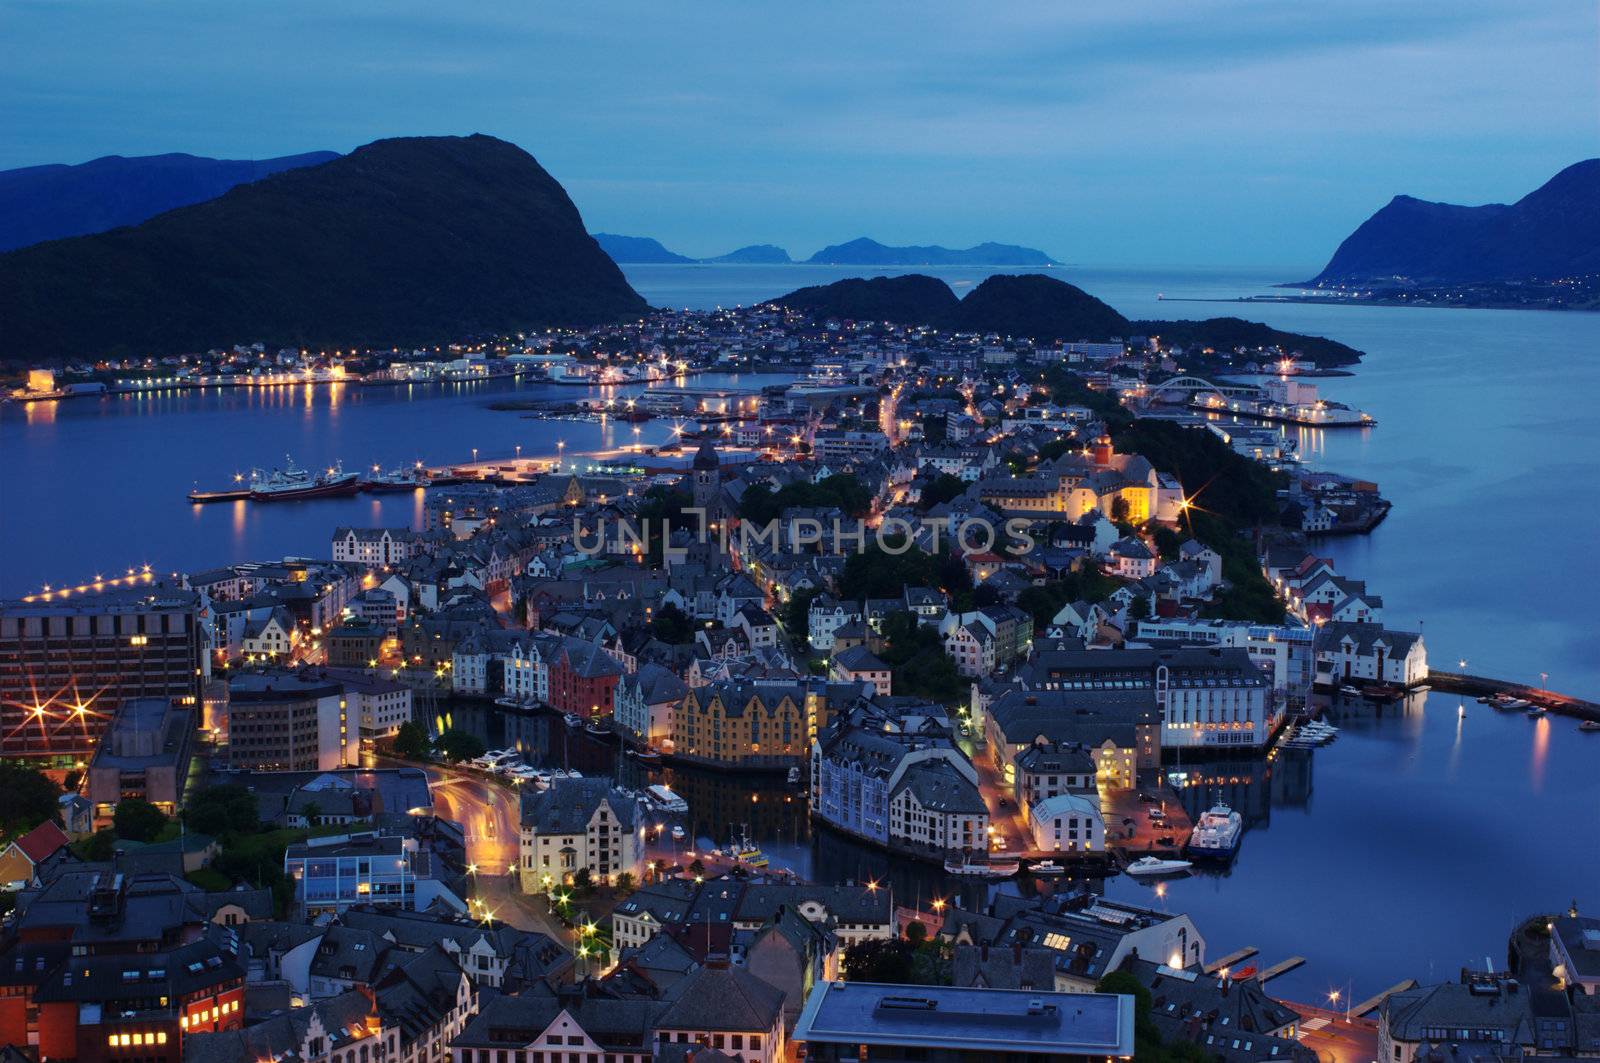 The Norwegian coastal town of Aalesund photographed at night